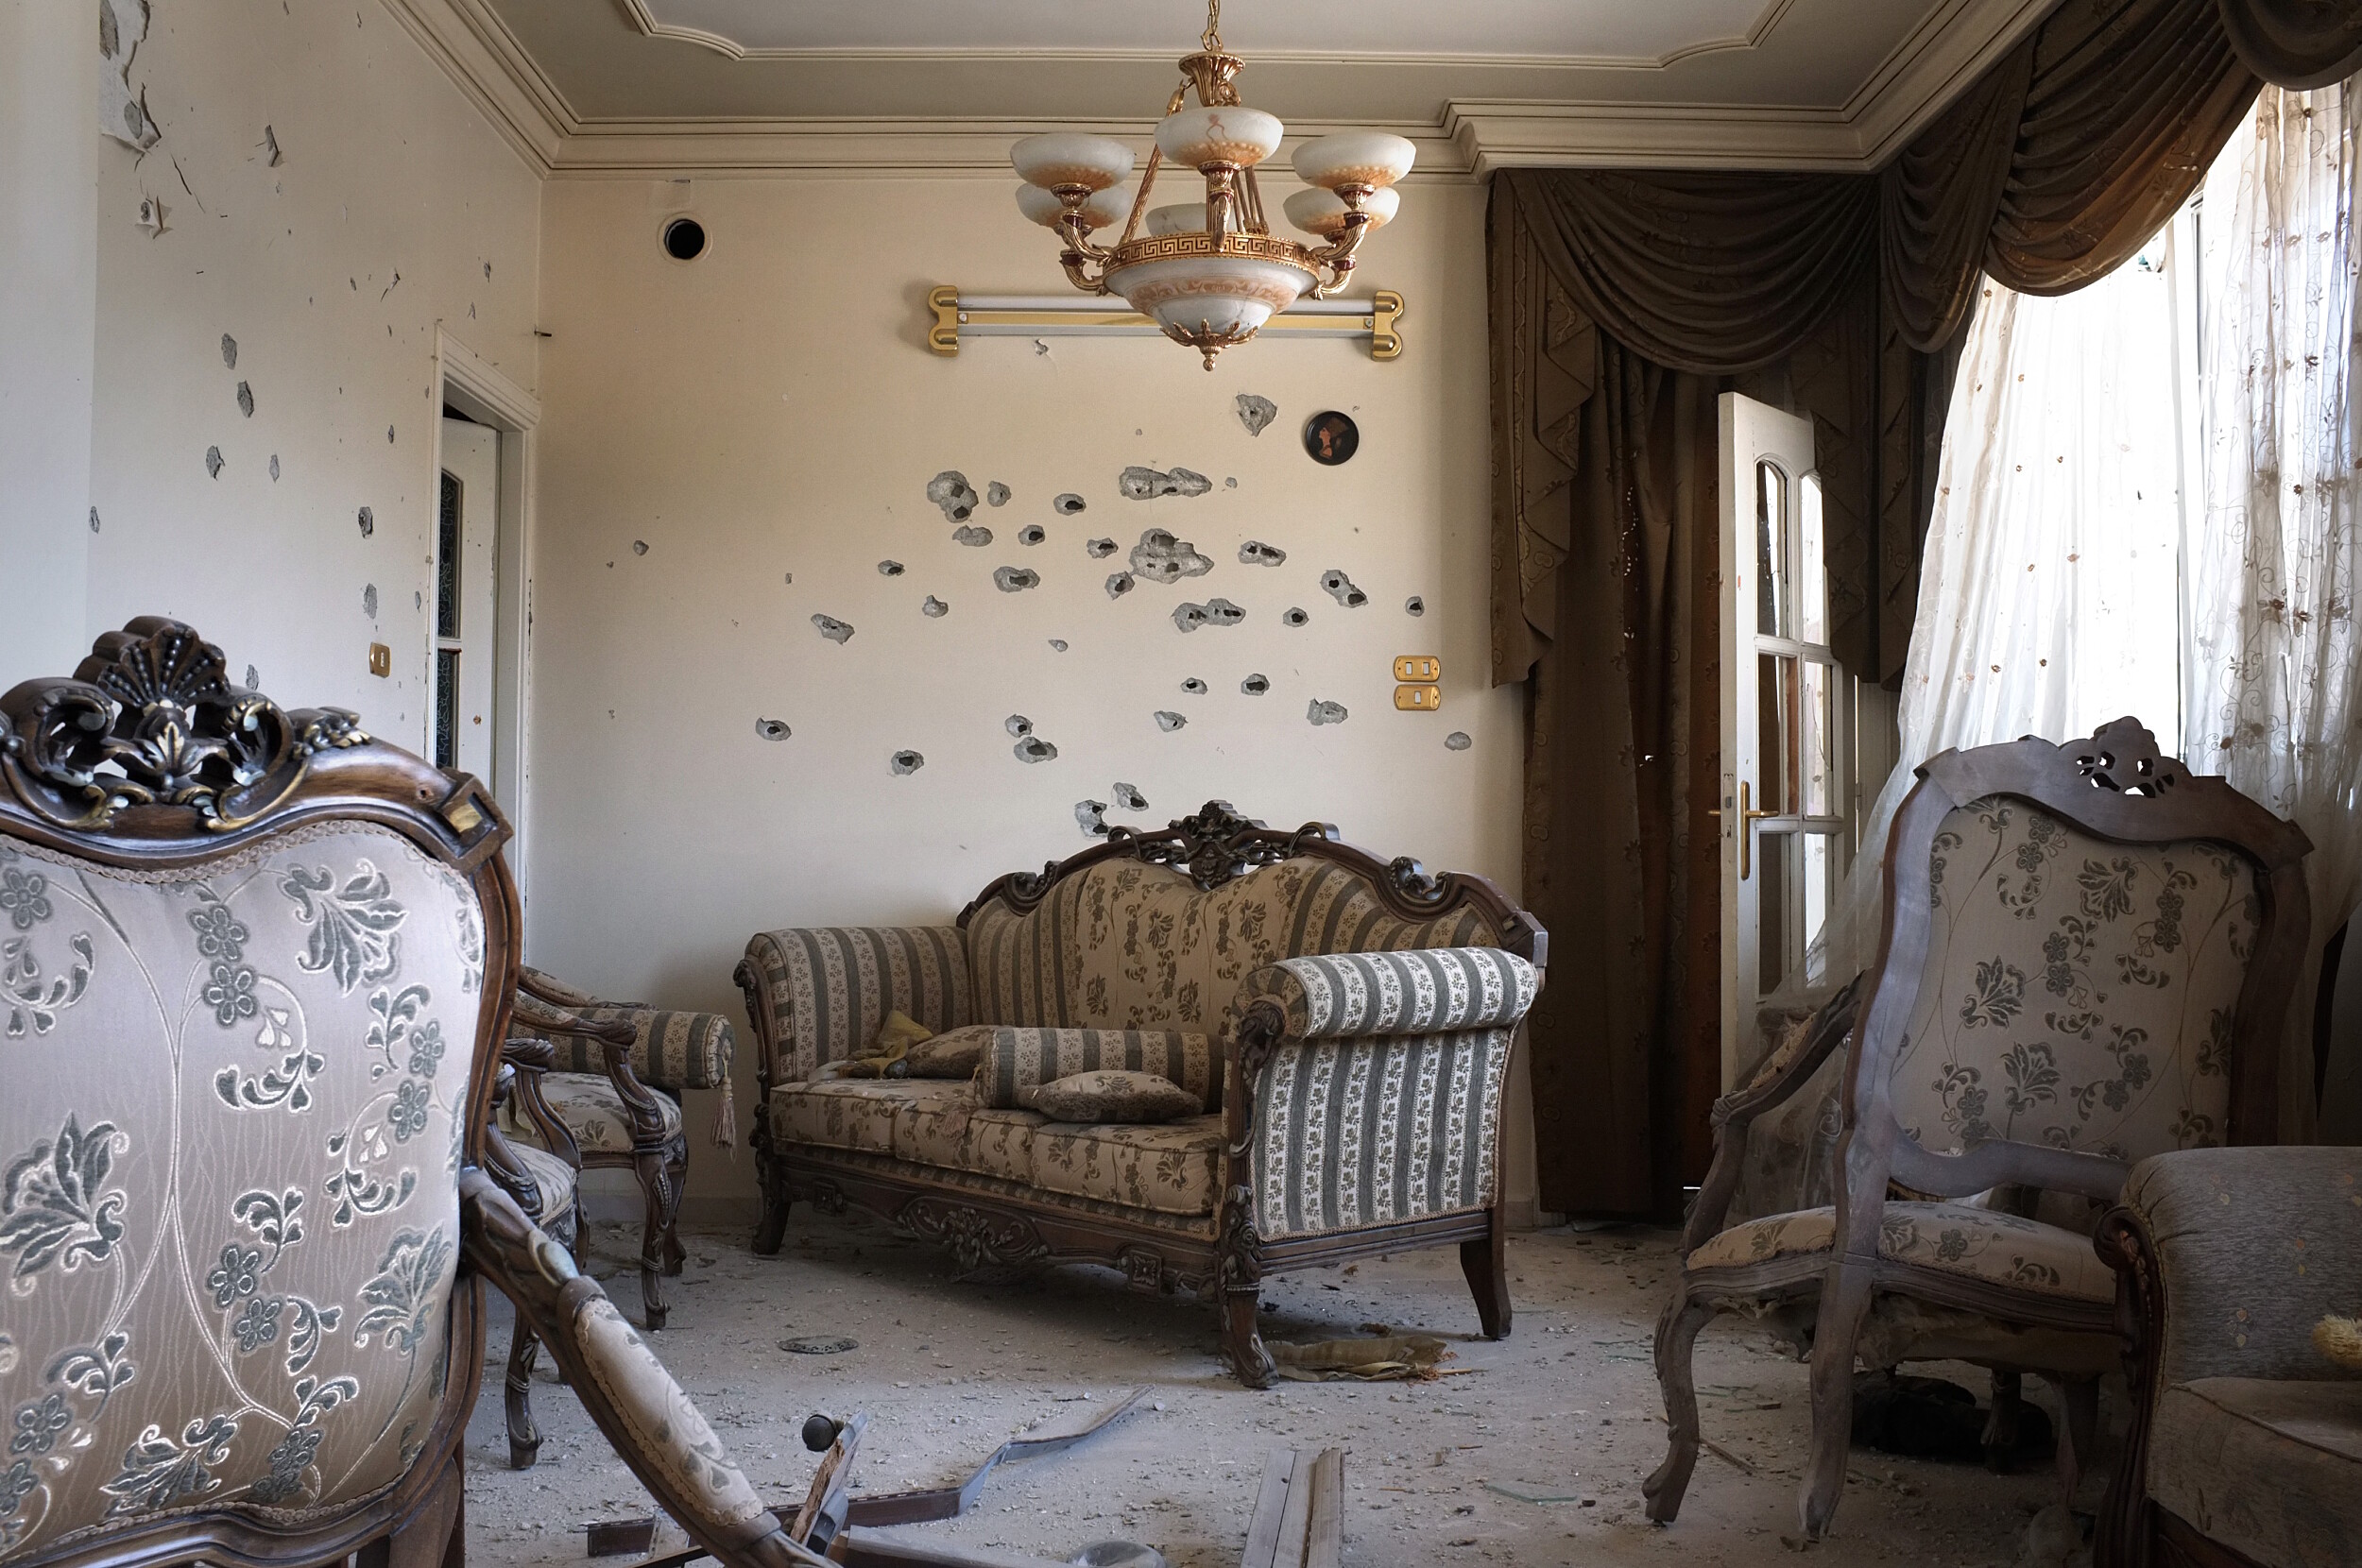 In a house on the border of Baba Amr, Homs bullet holes riddle the walls and furniture. Blocks of the city were abandoned and most shops were closed.